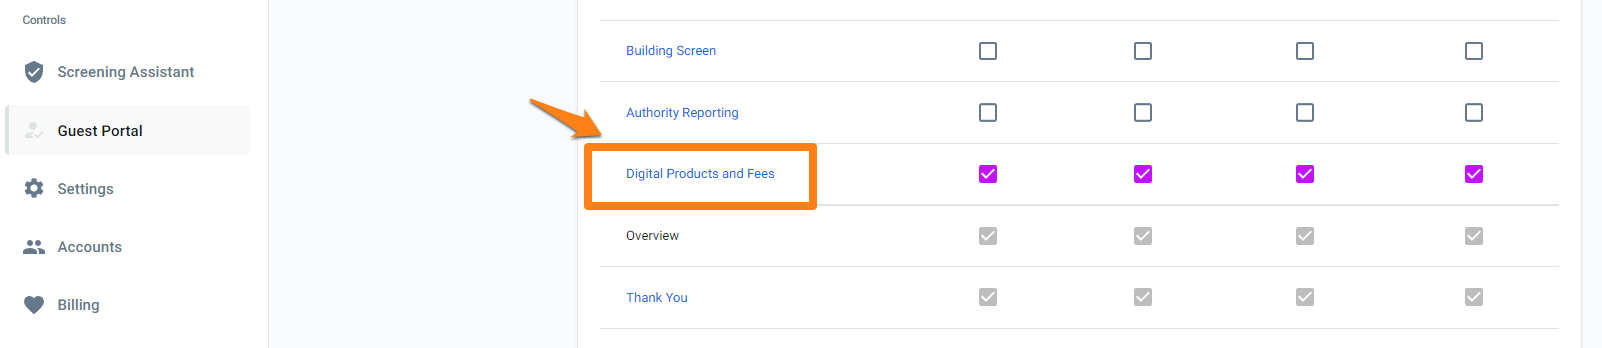 Screenshot_Where to Locate Digital Products and Fees Screen on Autohost at the Global Level-1